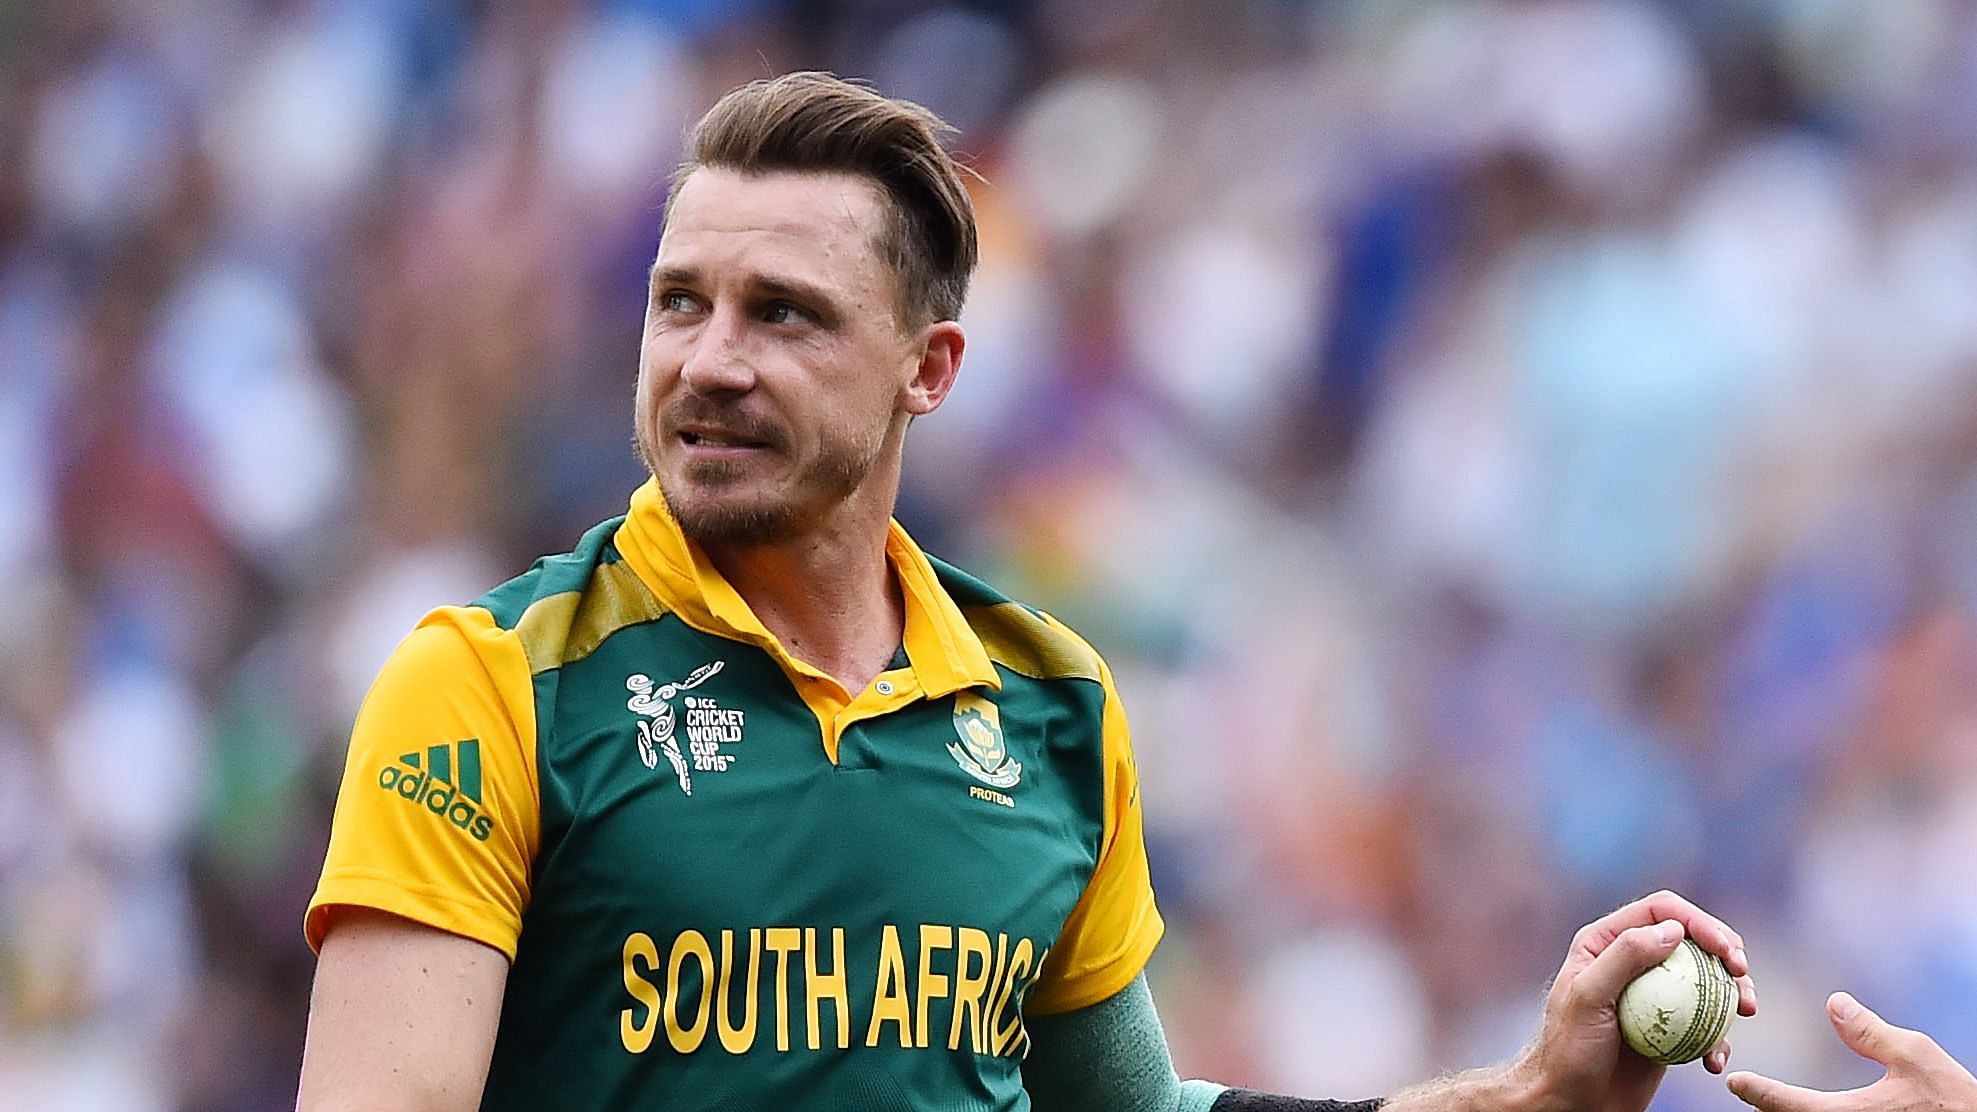 Dale Steyn is expected to be fit in time for the ICC World Cup 2019 that starts on 30 May.